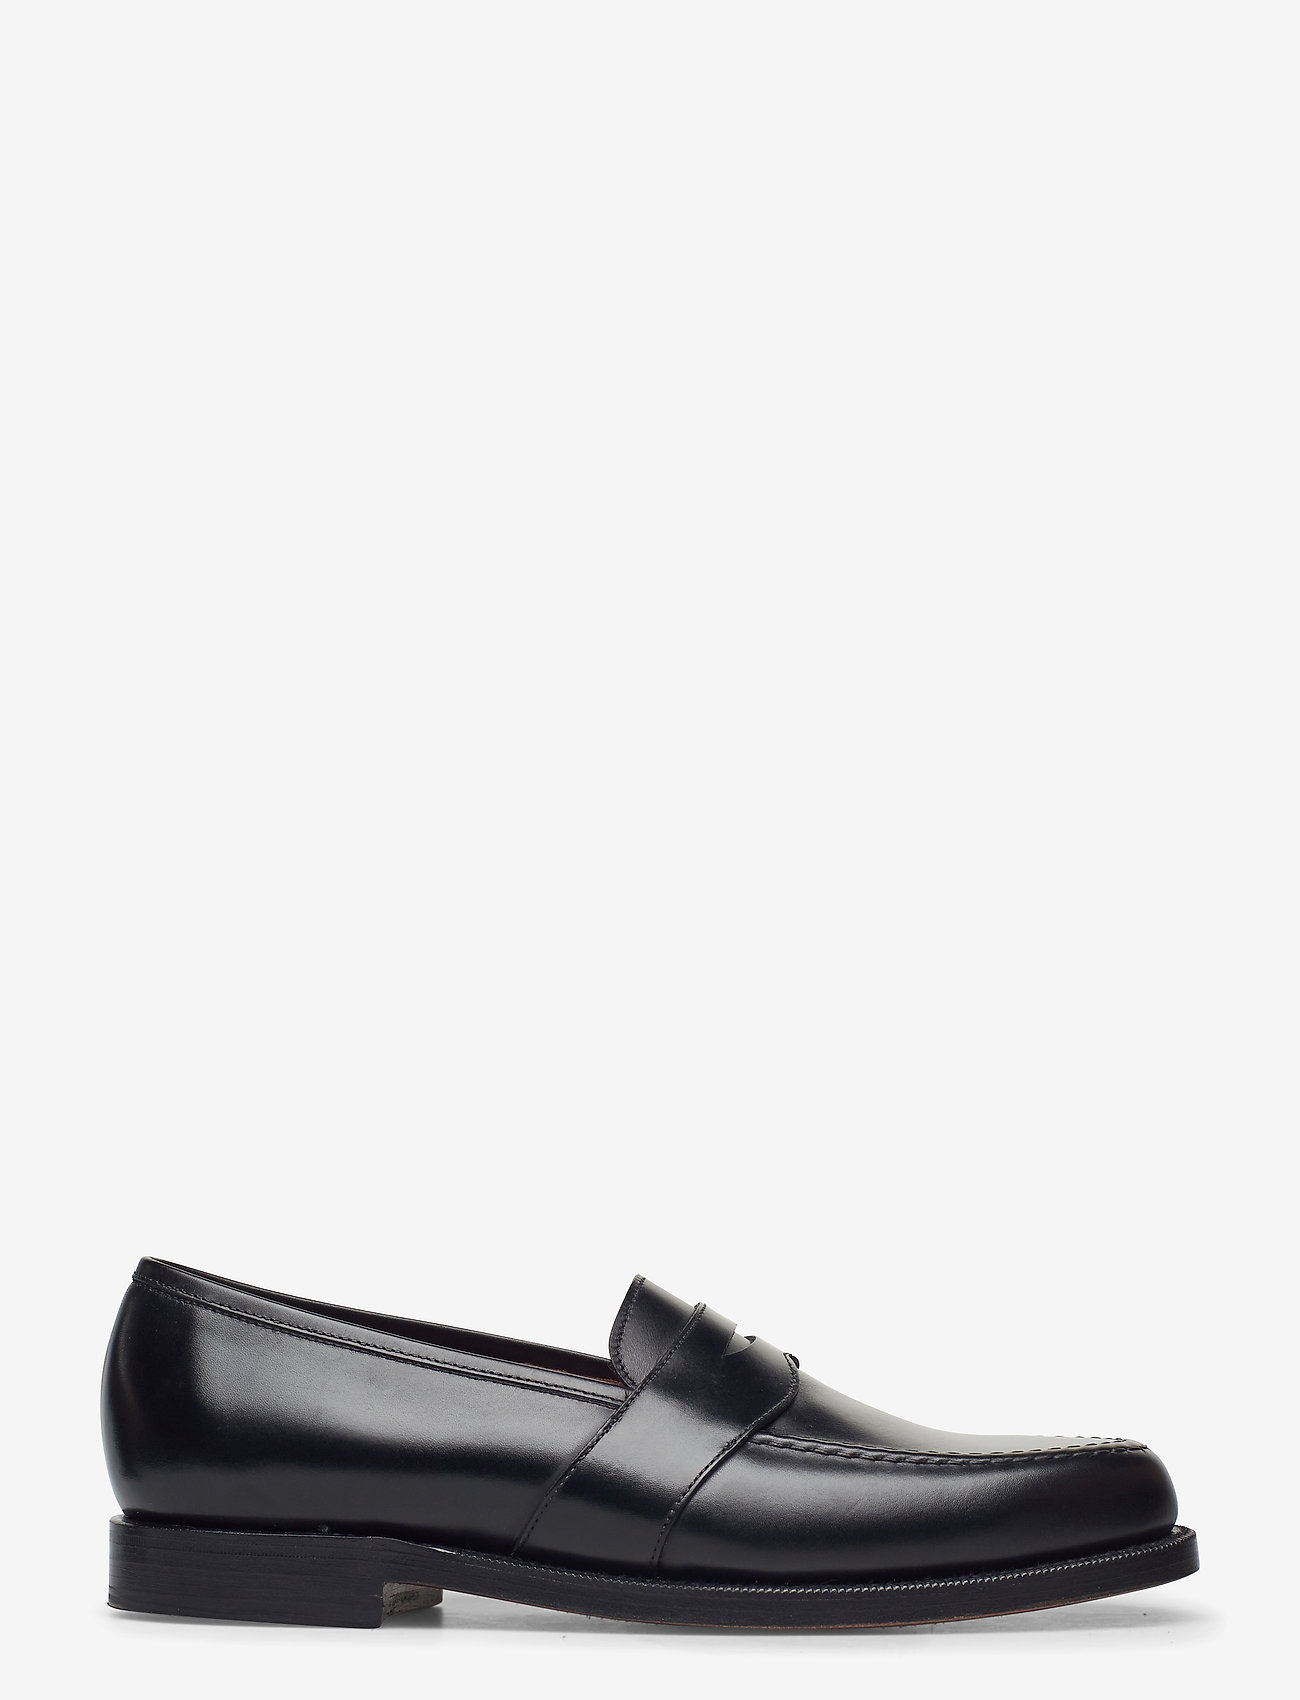 polo loafers black